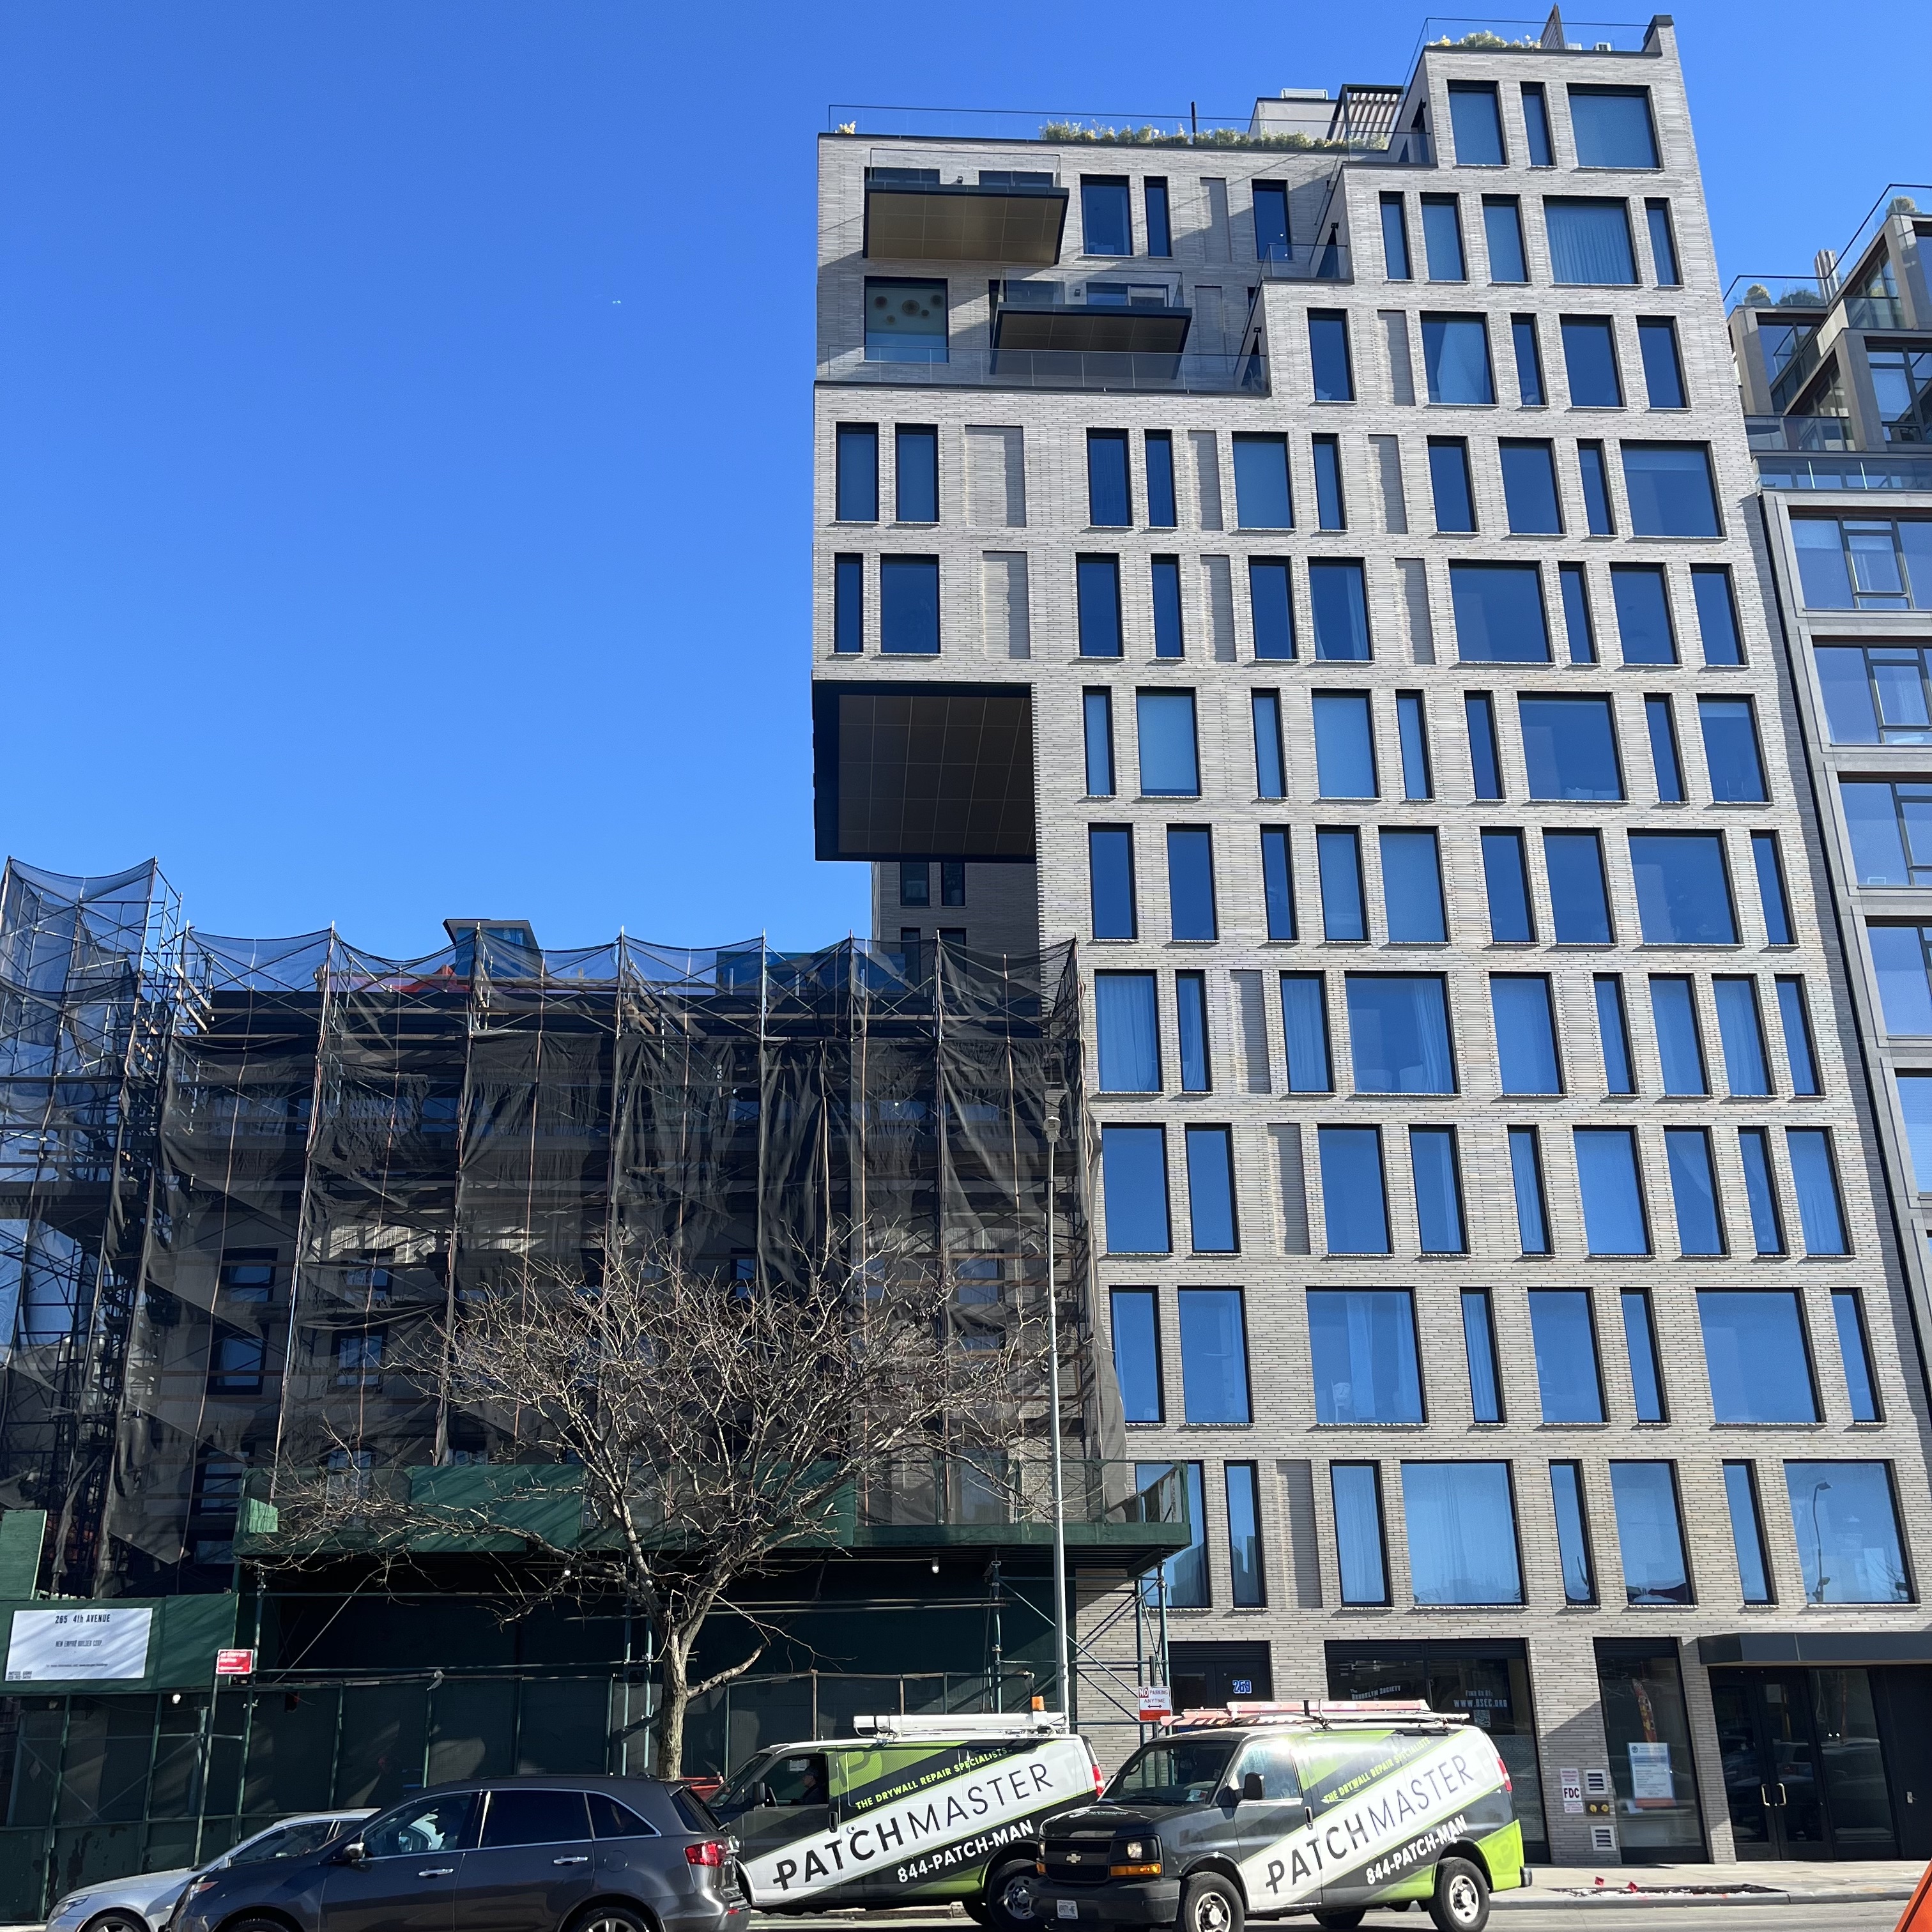 Six Garfield cantilevers over 265 4th Avenue, which will also become Six Garfield. Park Slope, Brooklyn.